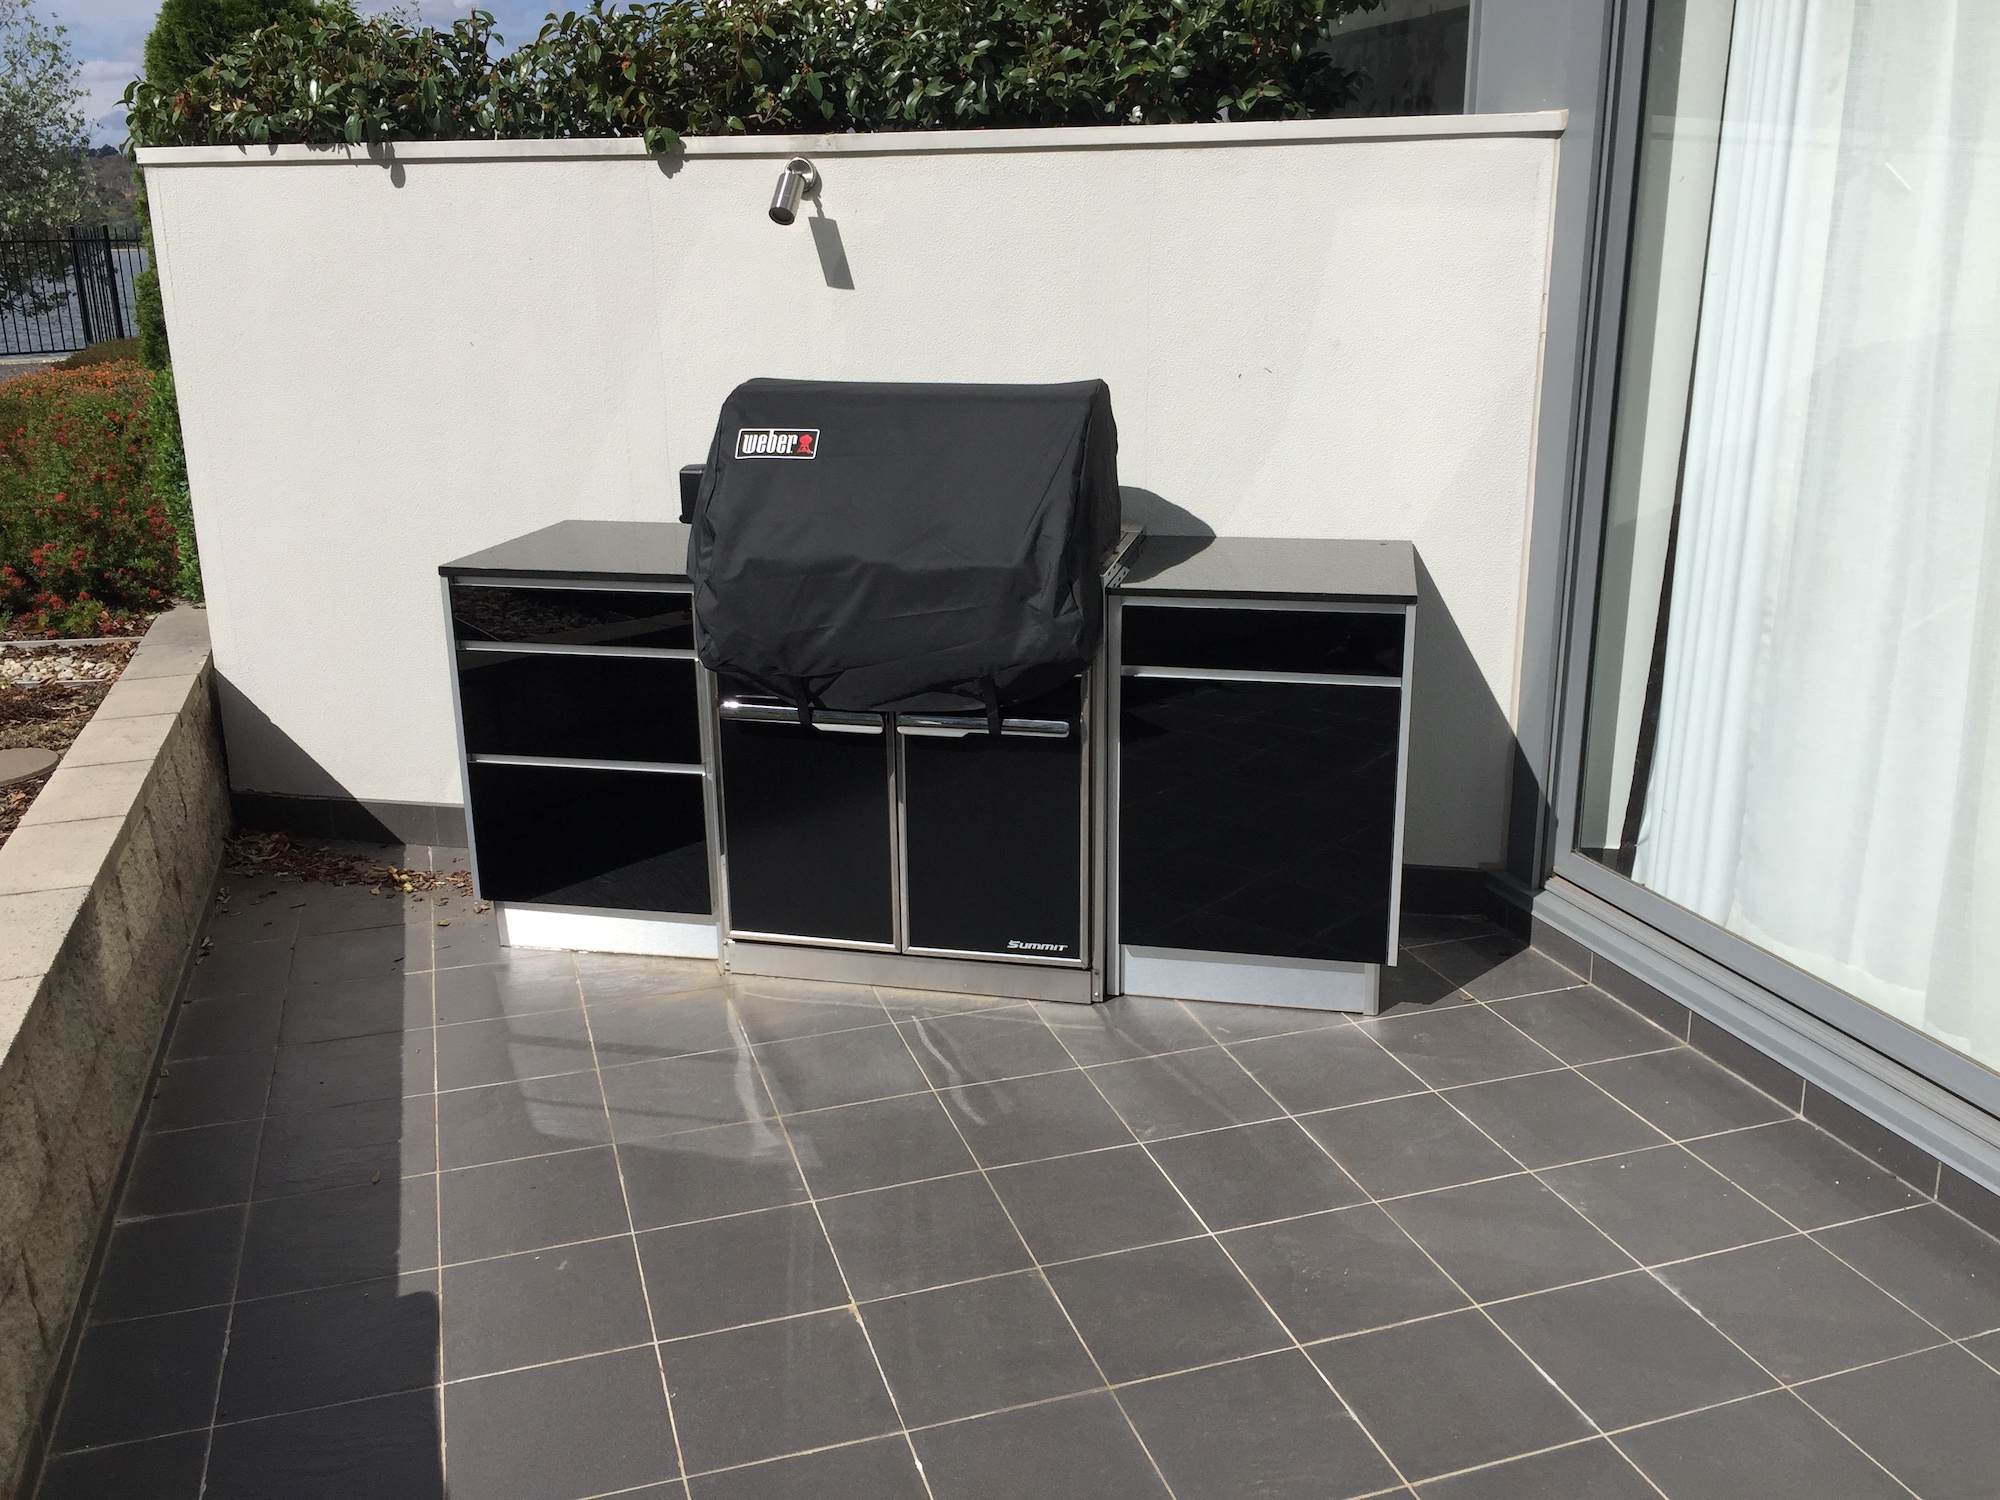 Full aluminium cabinets with 18mm black galaxy granite tops and 5mm tempered glass black doors, customer supplied their Weber Summit BBQ. Kingston, ACT